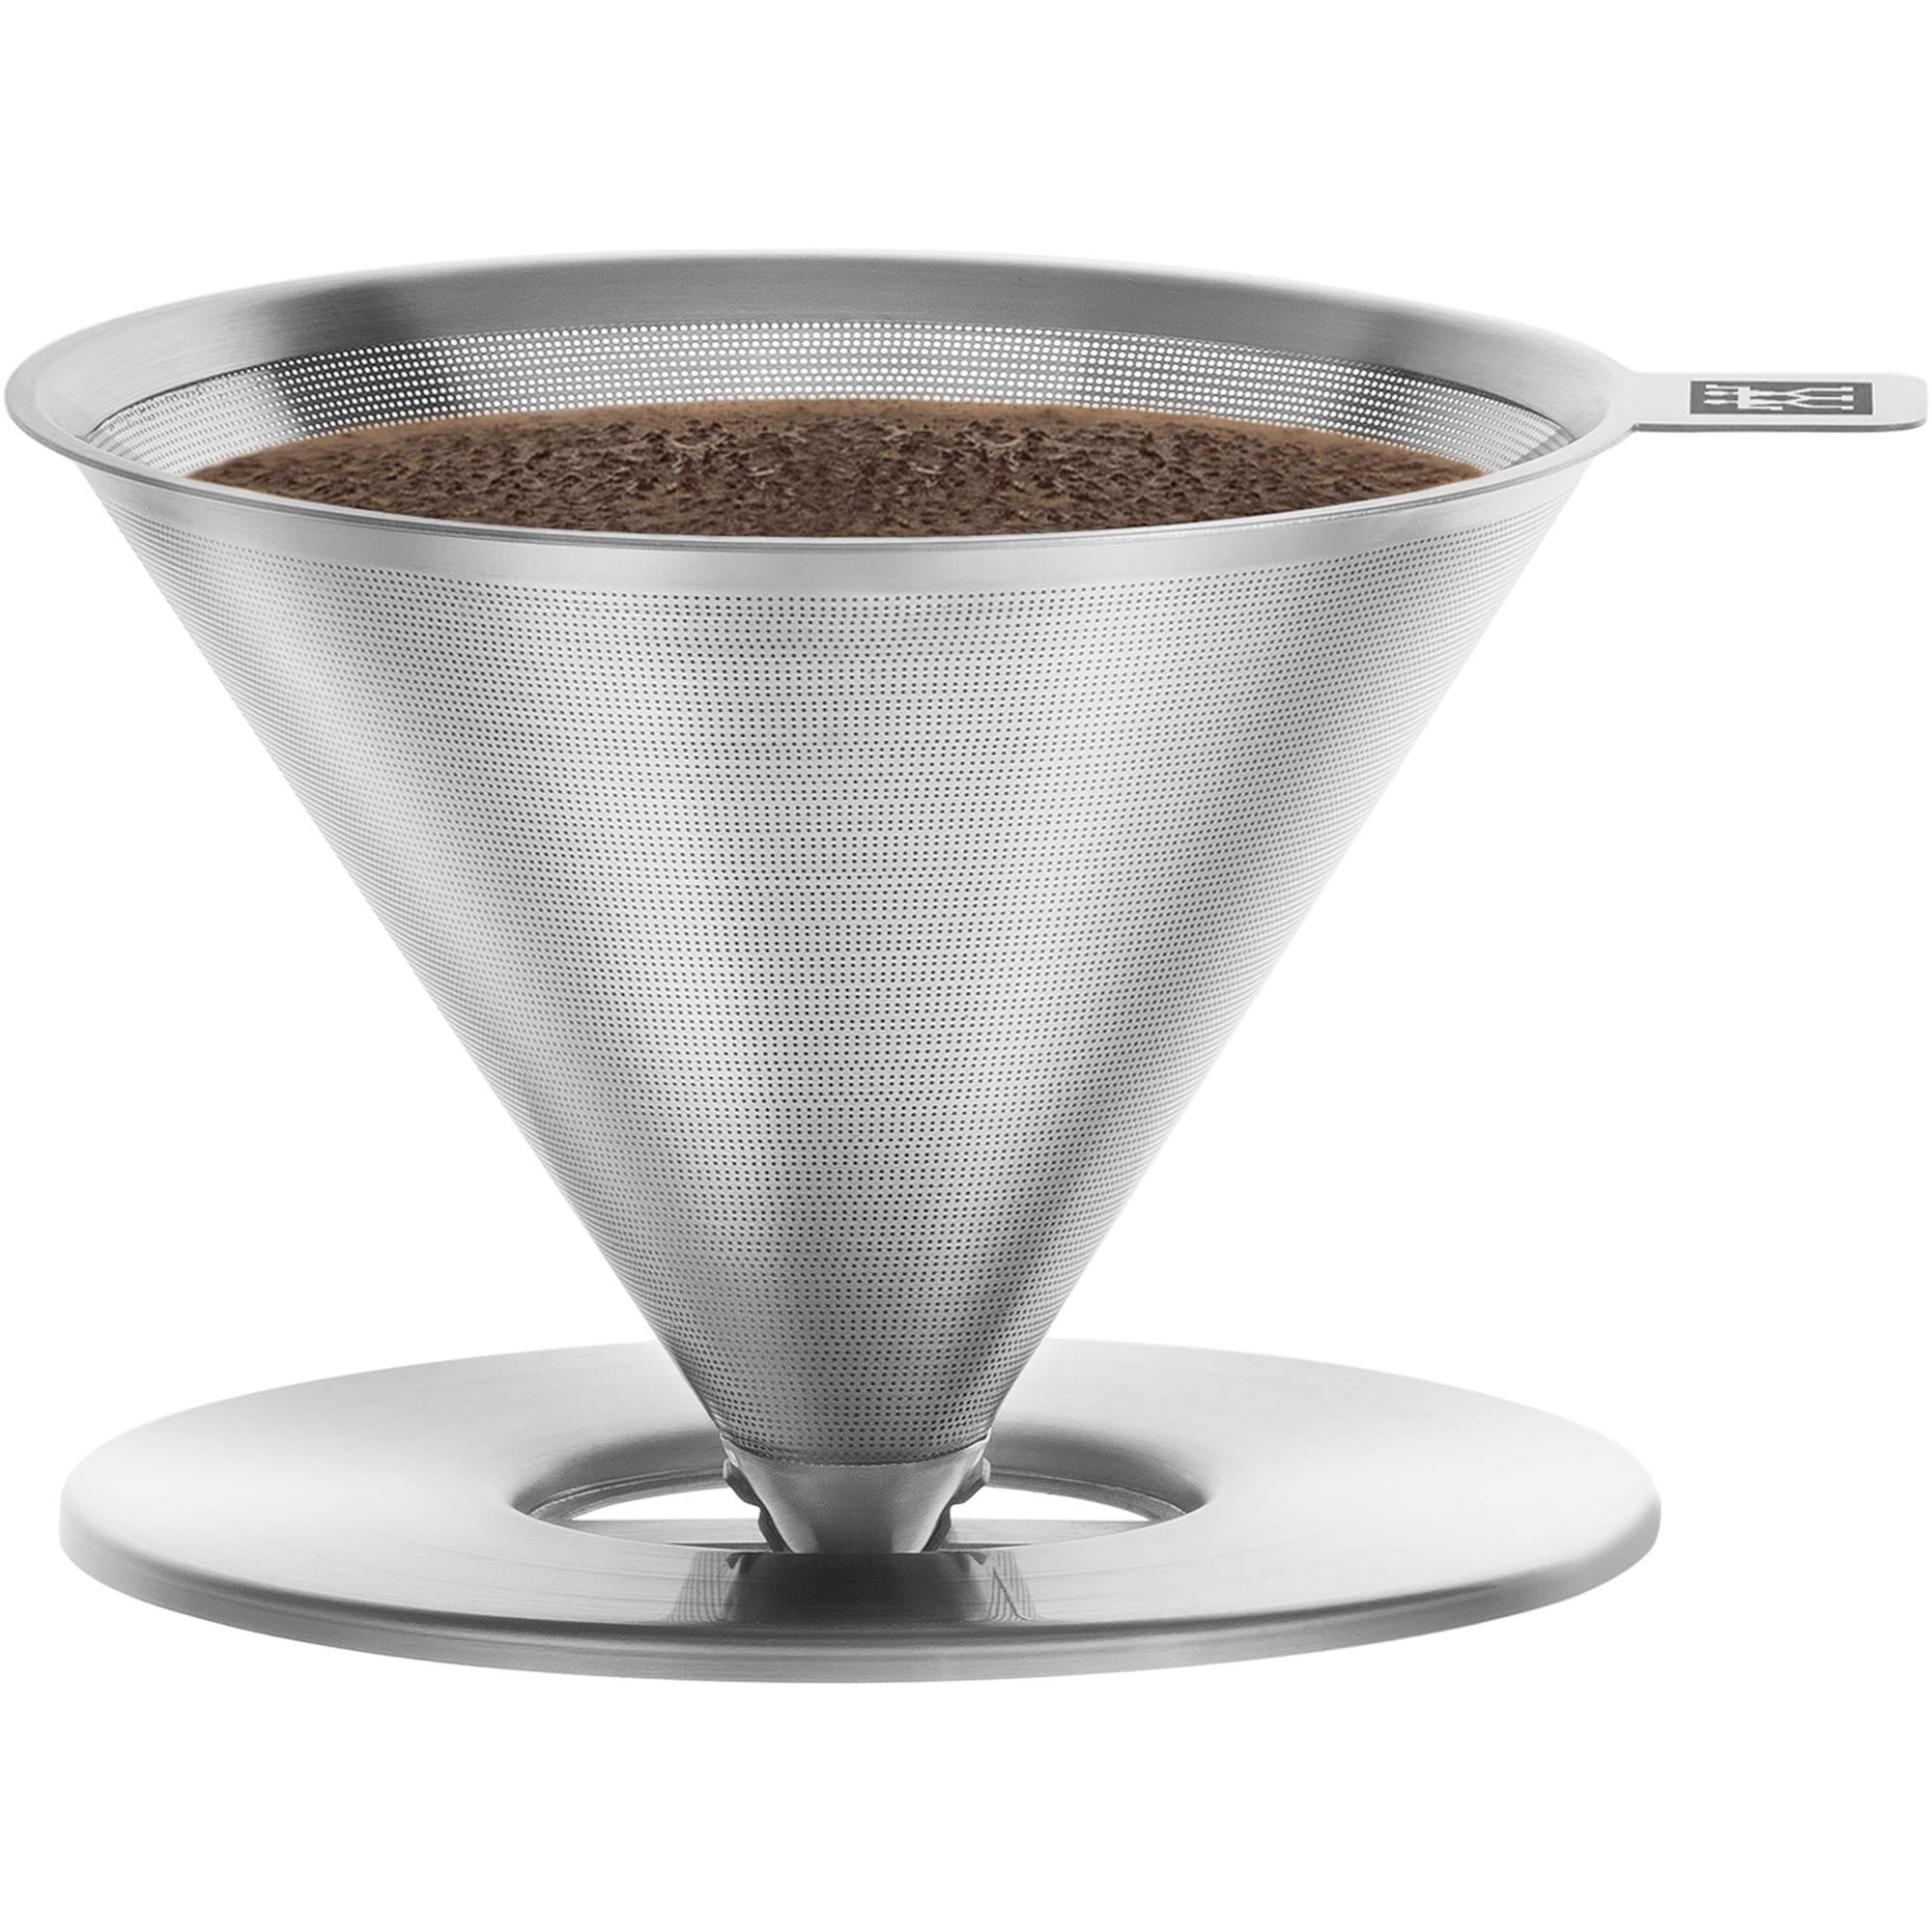 https://ak1.ostkcdn.com/images/products/is/images/direct/17a38b4bd3e79fa3445c4668f7048abf63b5d01b/ZWILLING-Sorrento-Stainless-Steel-Pour-Over-Coffee-Dripper.jpg